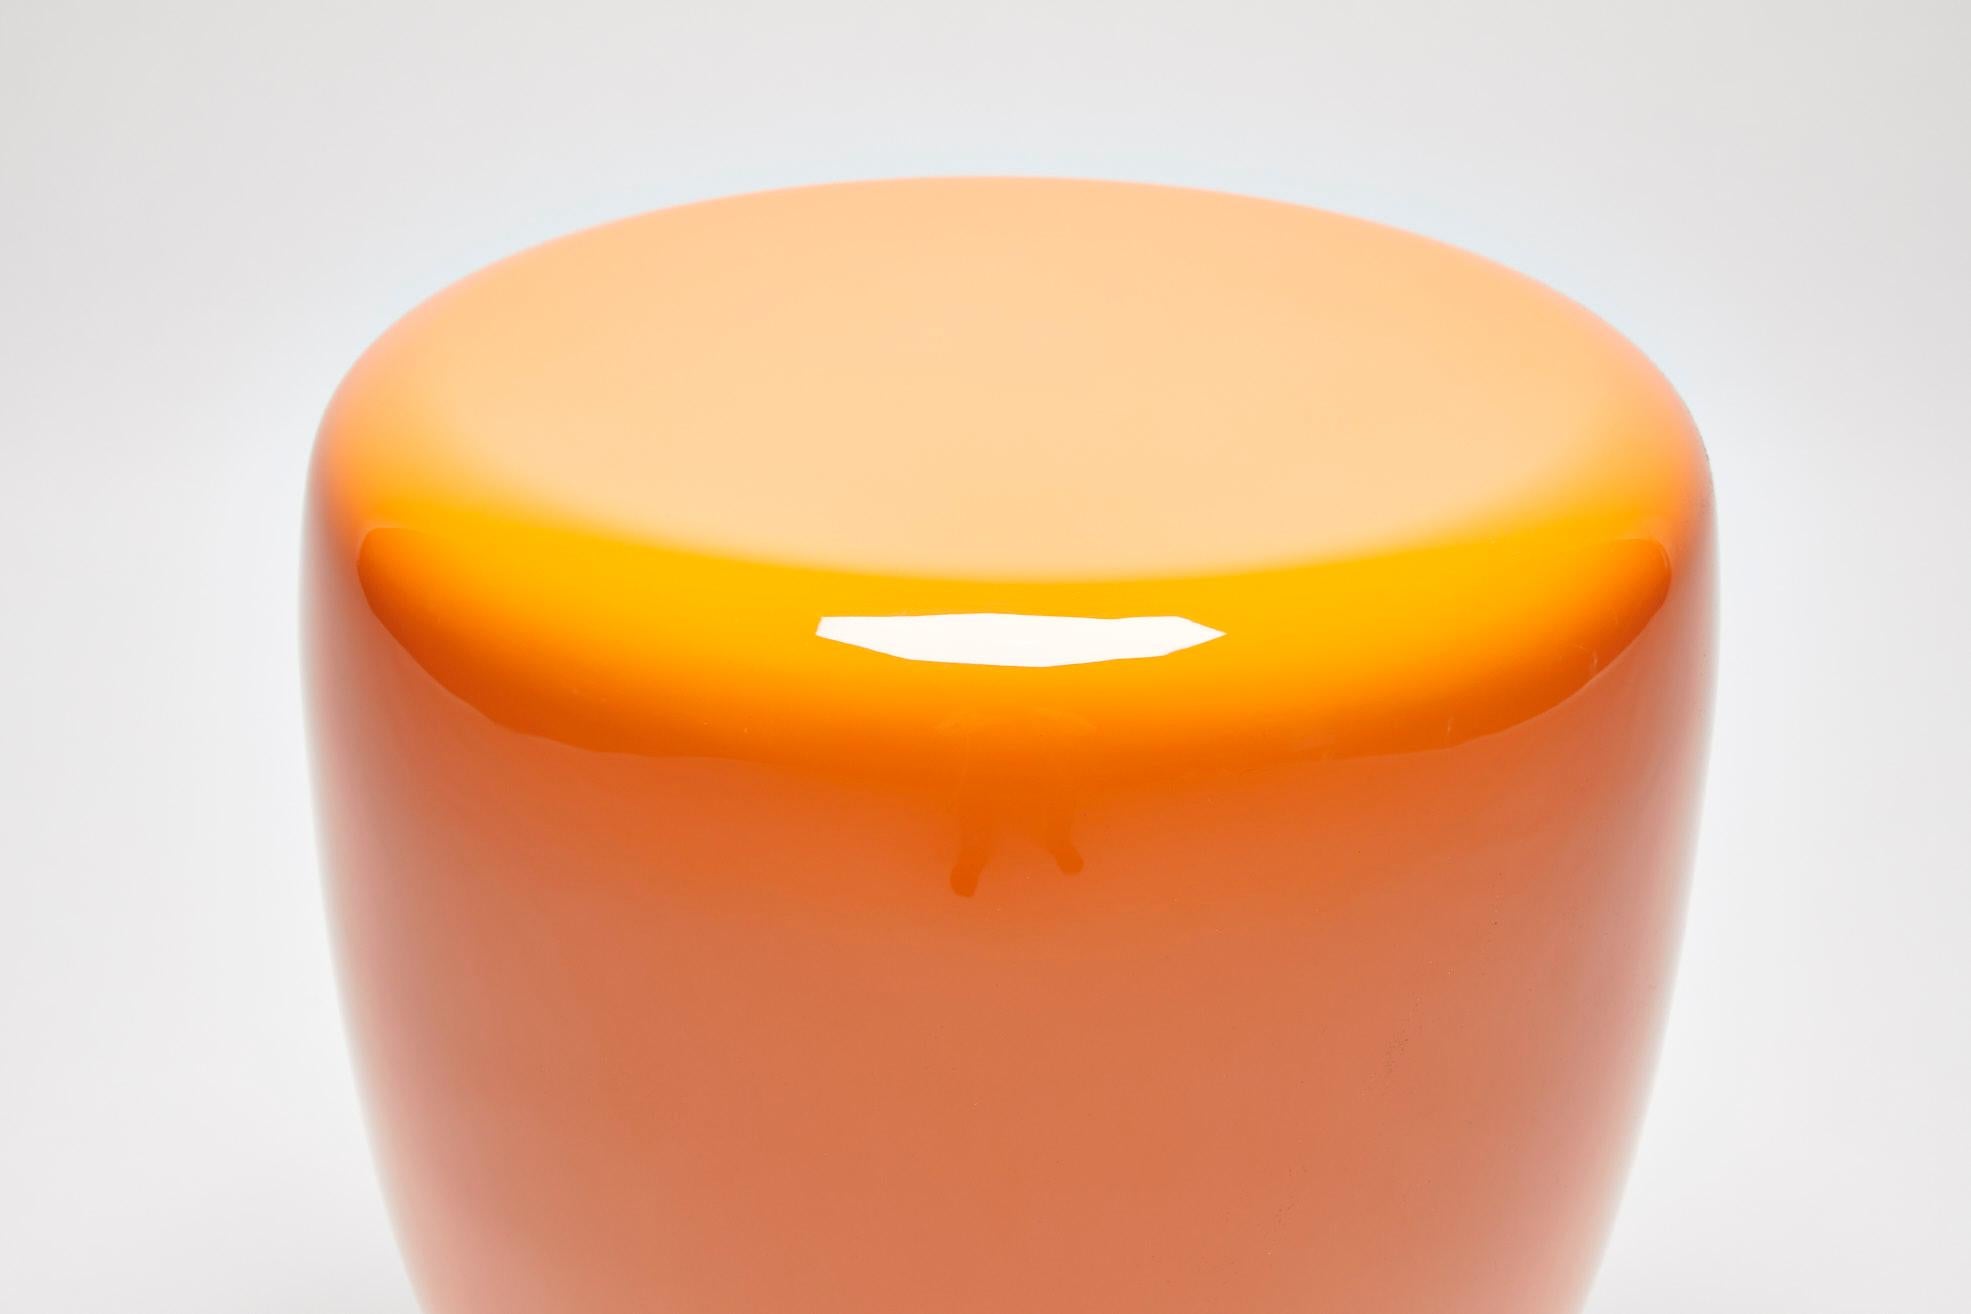 Minimalist Side Table, Orange XL DOT by Reda Amalou Design, 2017 - Glossy lacquer For Sale